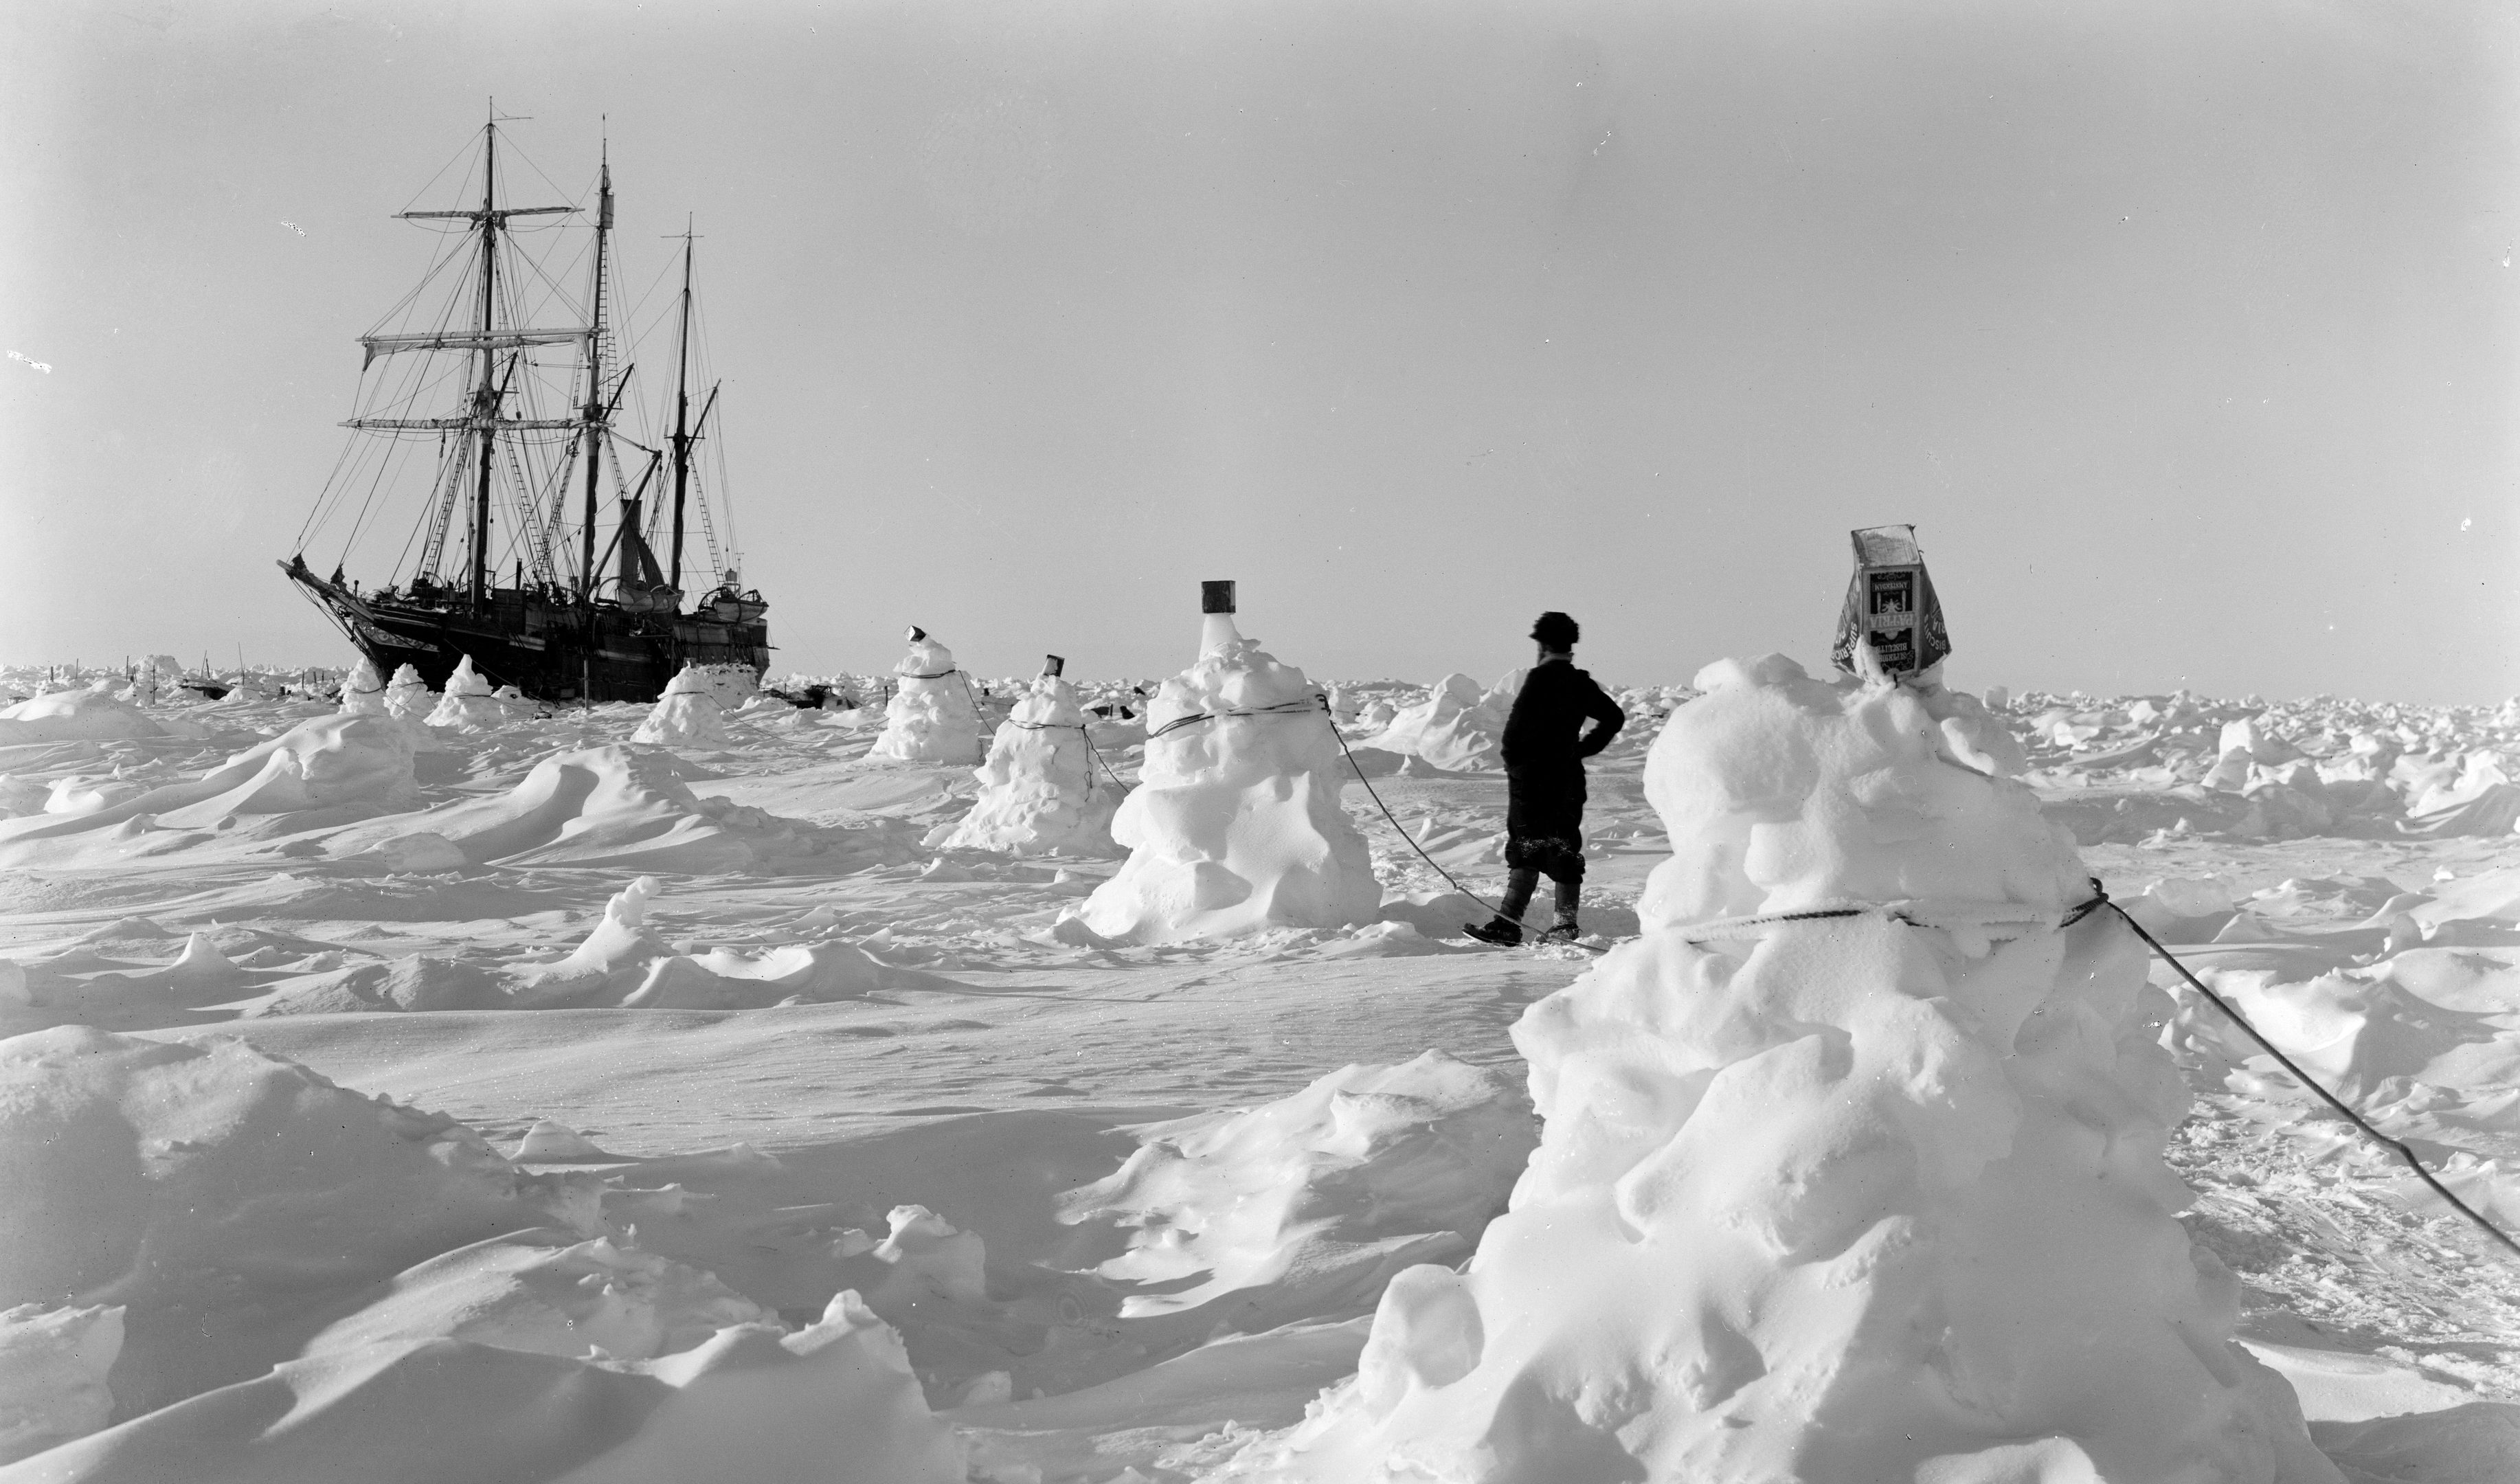 shackleton's journey to the south pole